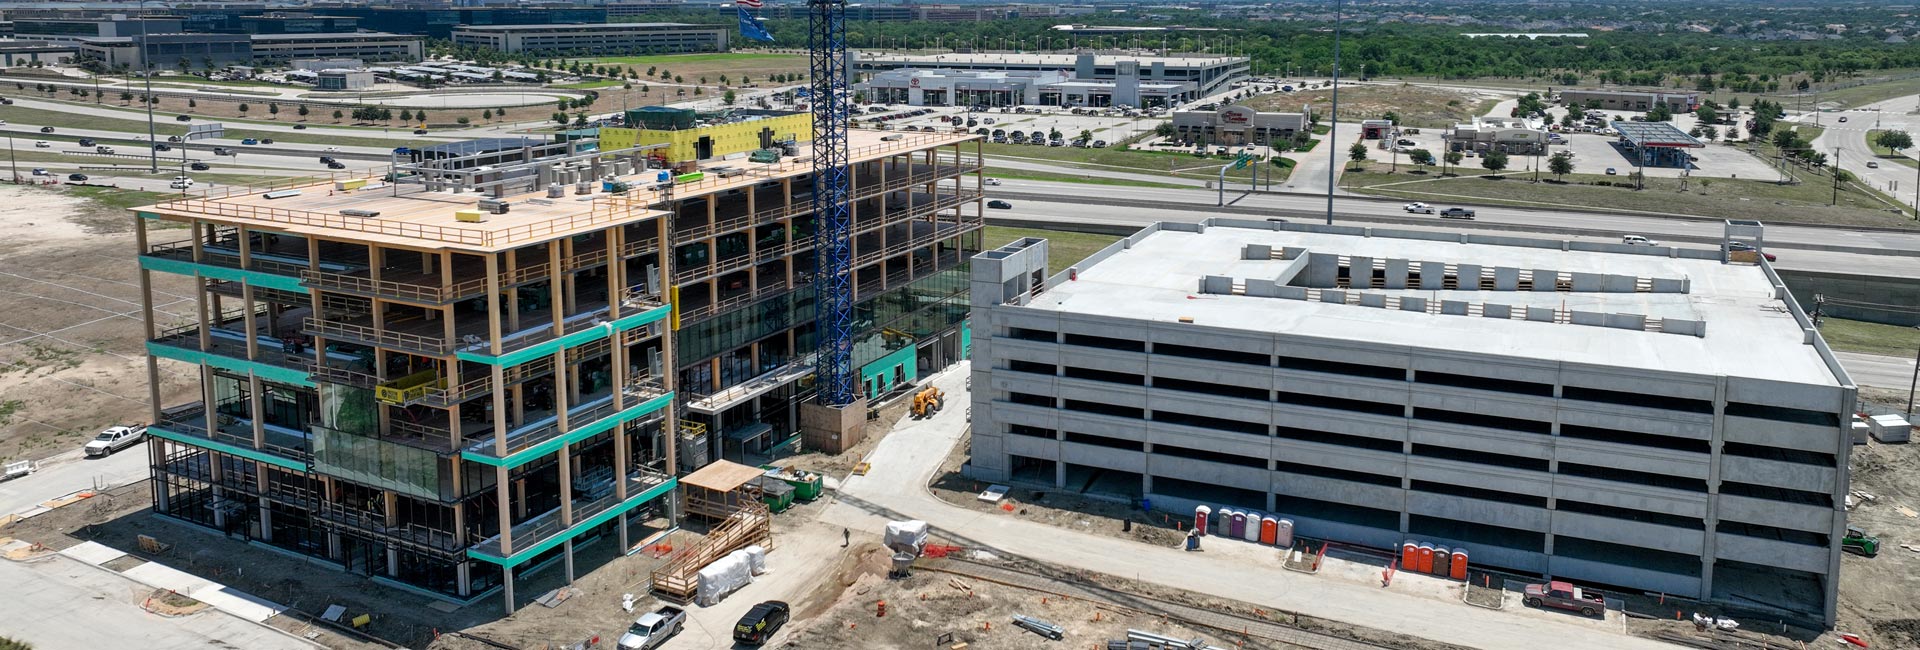 Mass timber construction on SouthStone Yards in Dallas, Texas